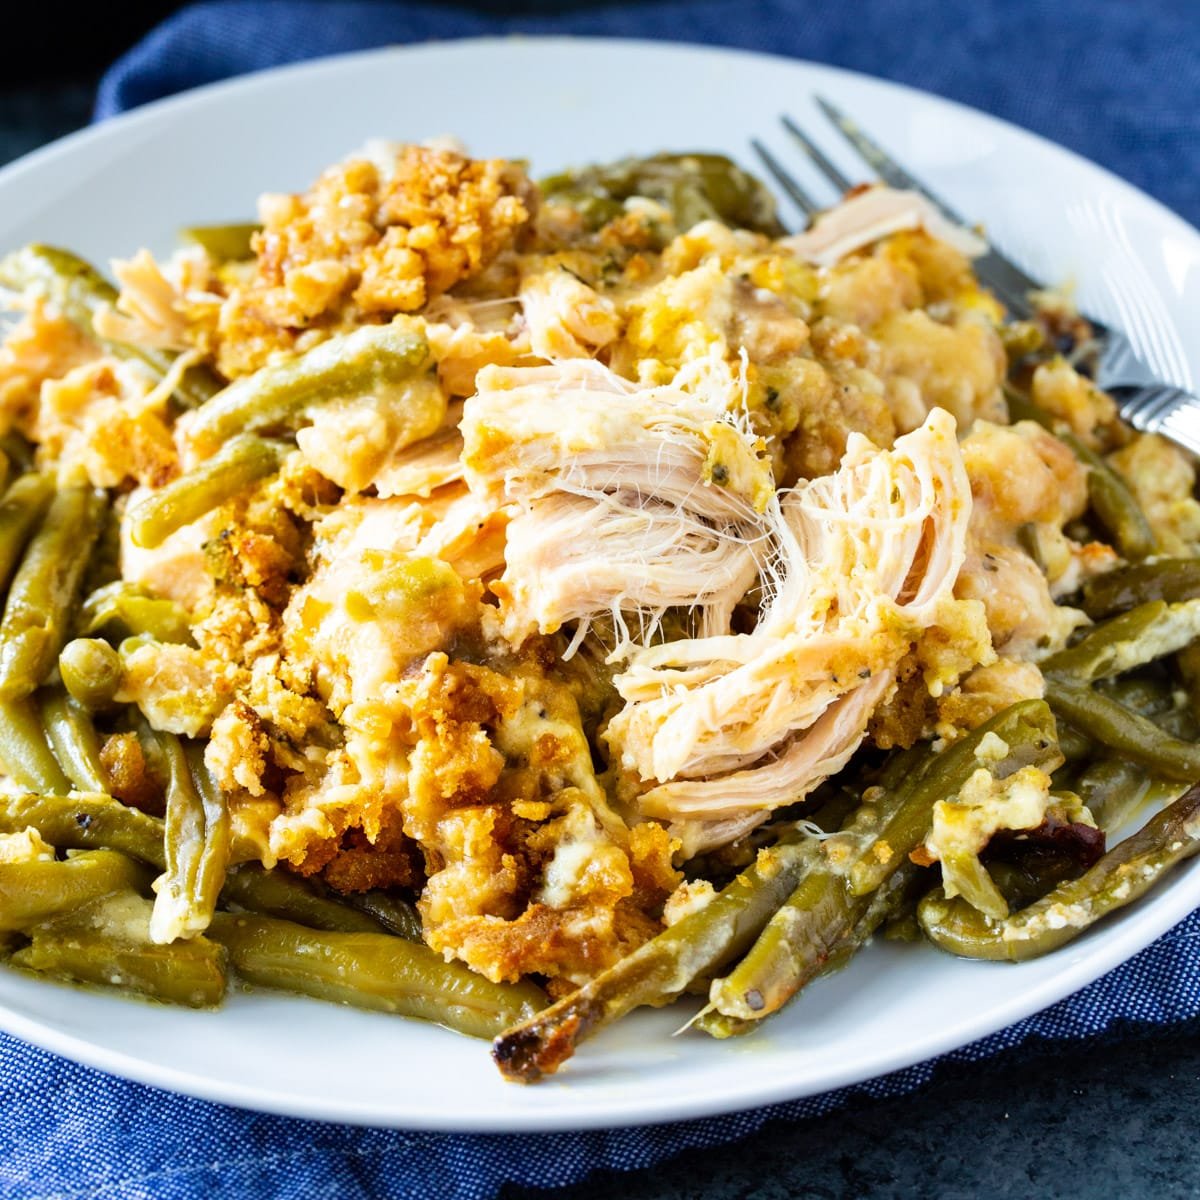 Crock Pot Chicken and Stuffing with Green Beans dished up on a plate.